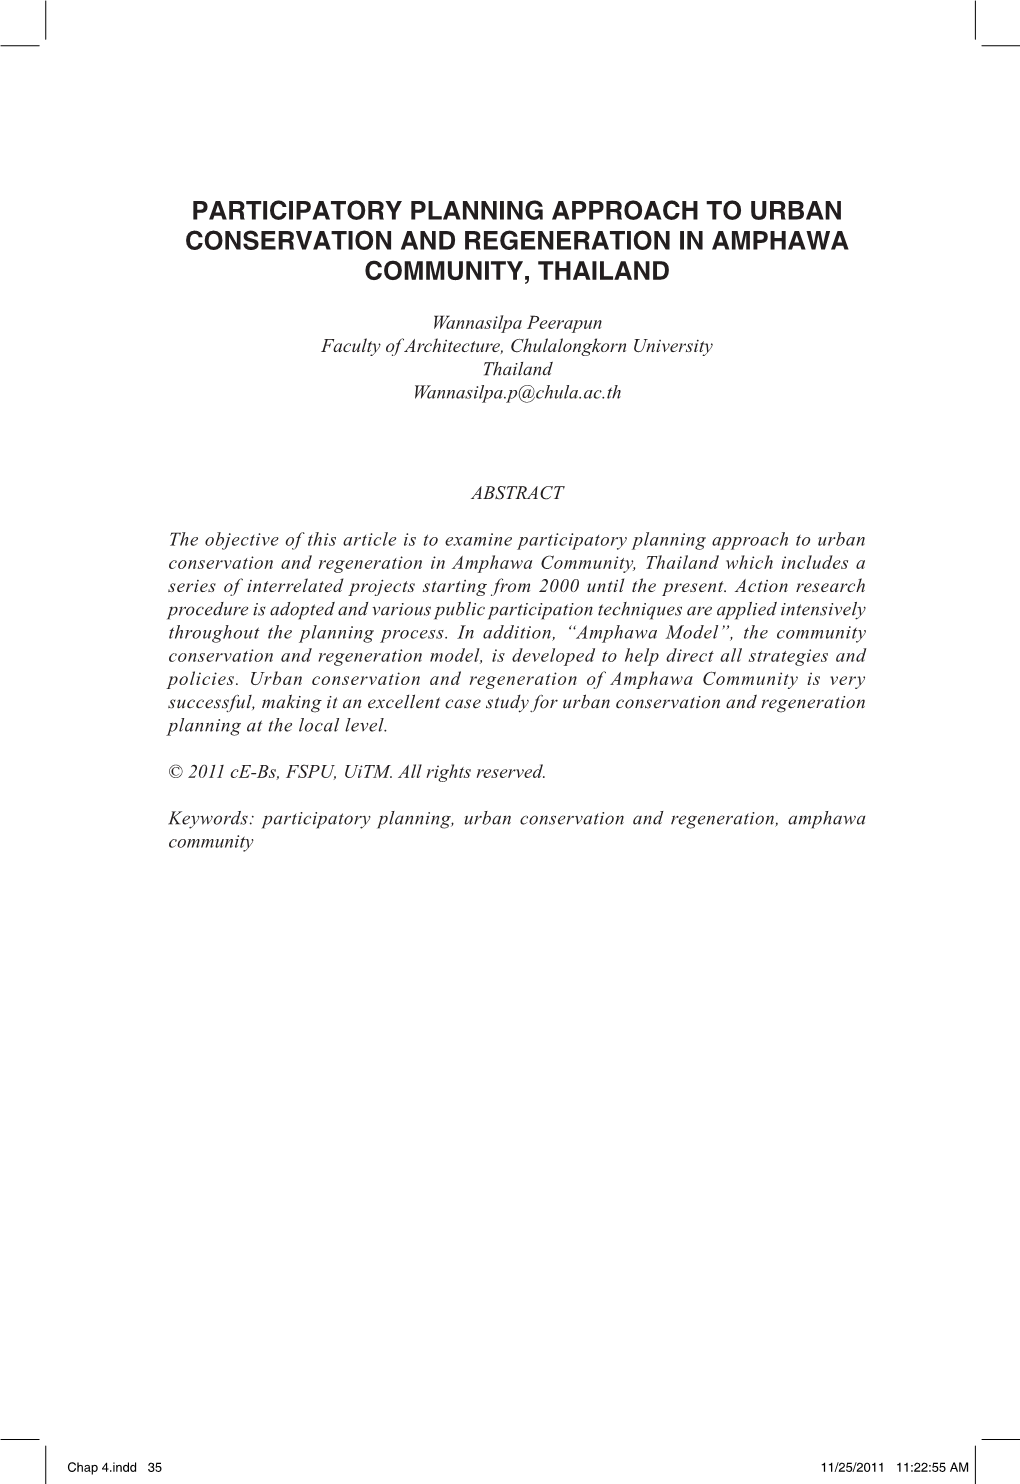 Participatory Planning Approach to Urban Conservation and Regeneration in Amphawa Community, Thailand